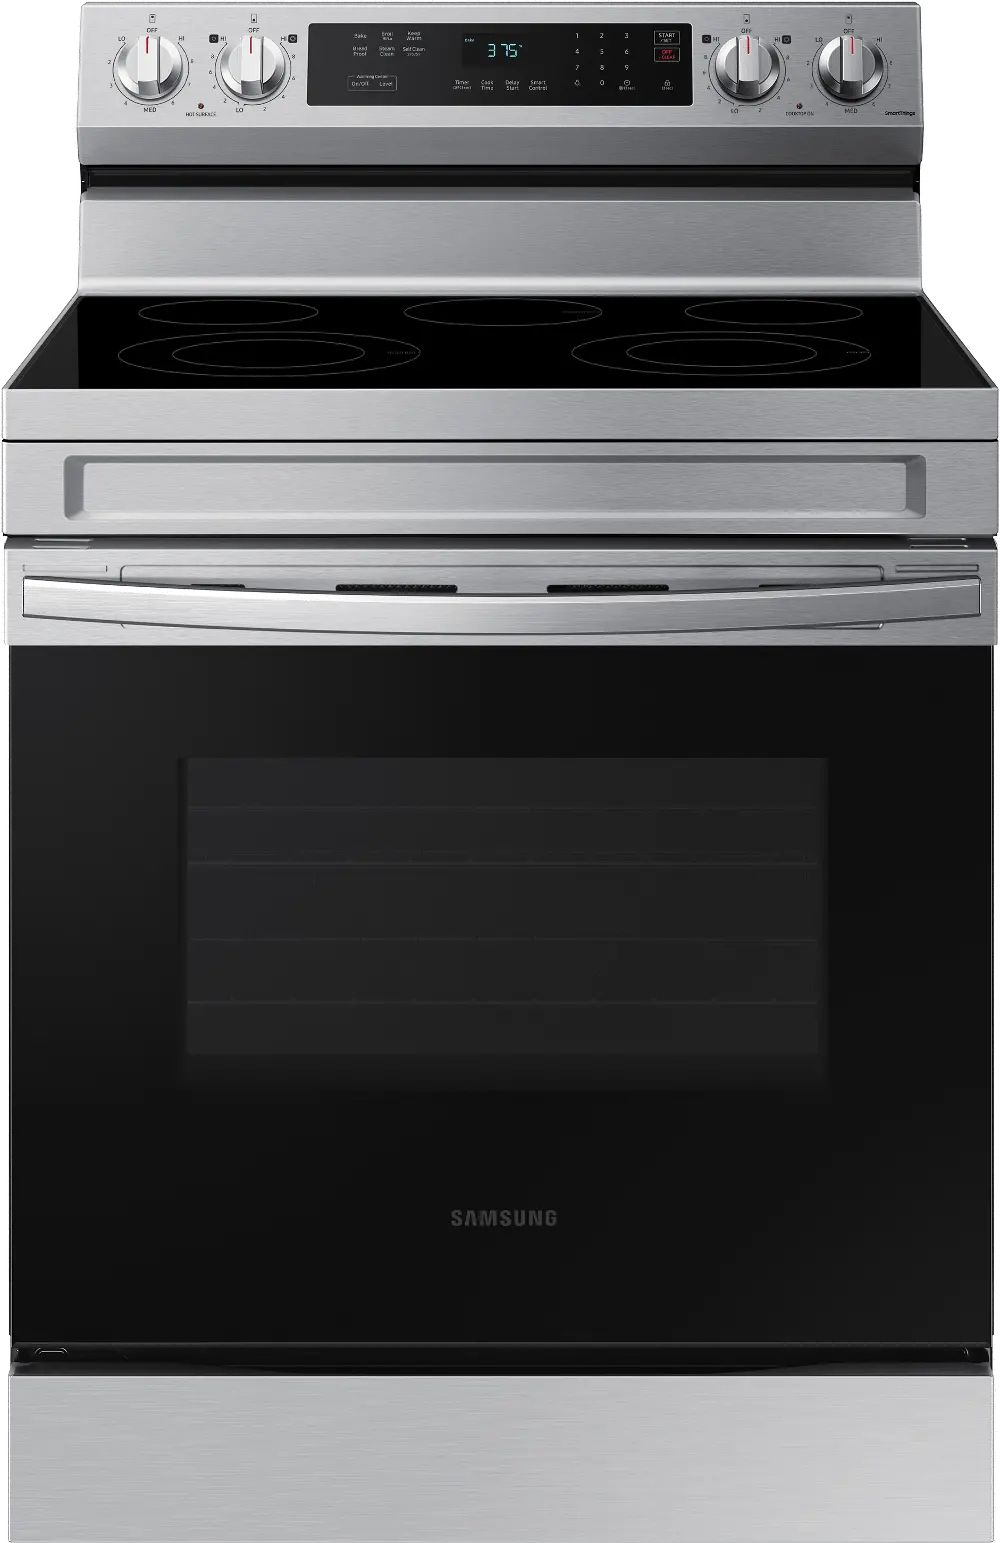 NE63A6311SS Samsung 6.3 cu ft Electric Range - Stainless Steel-1